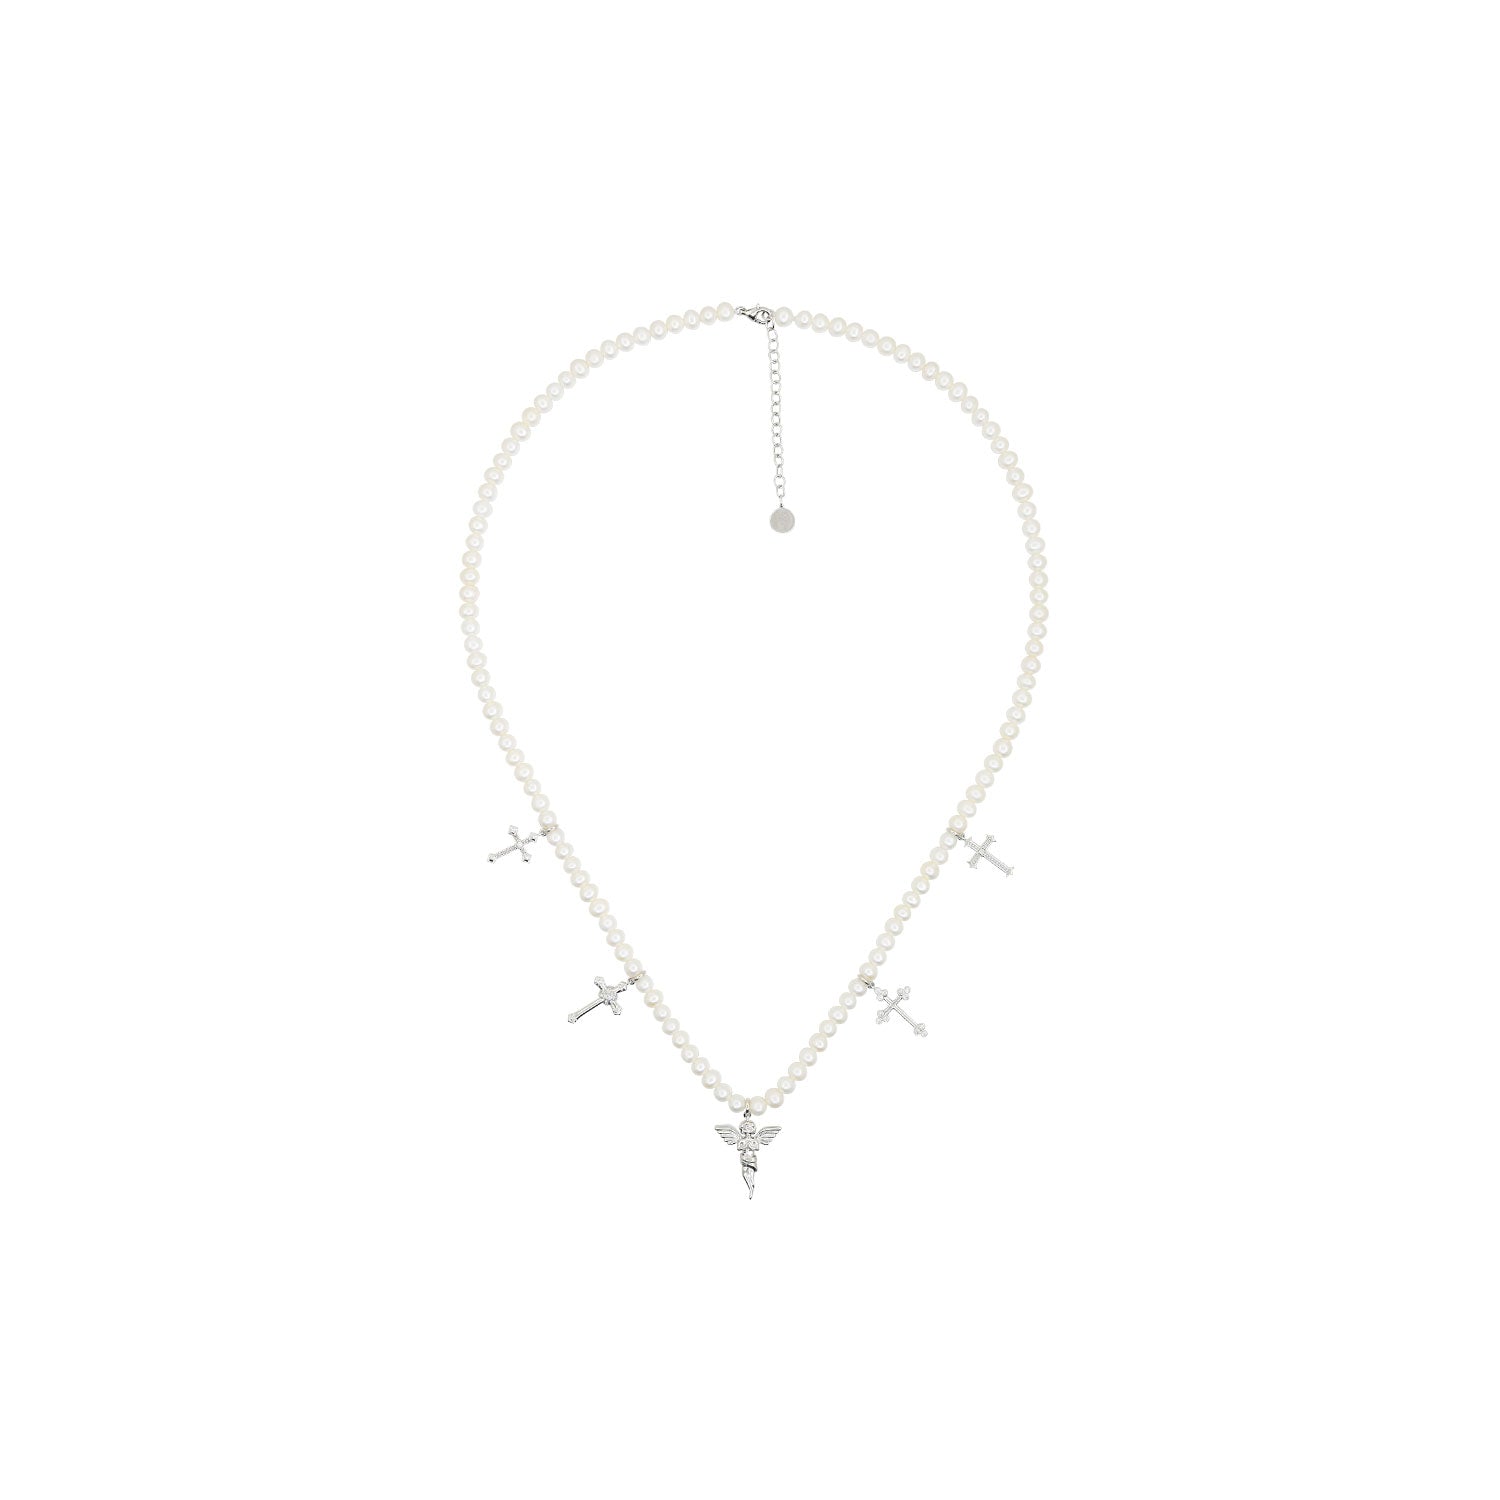 pearl_fifth_crussex_necklace_14k_white_gold_3